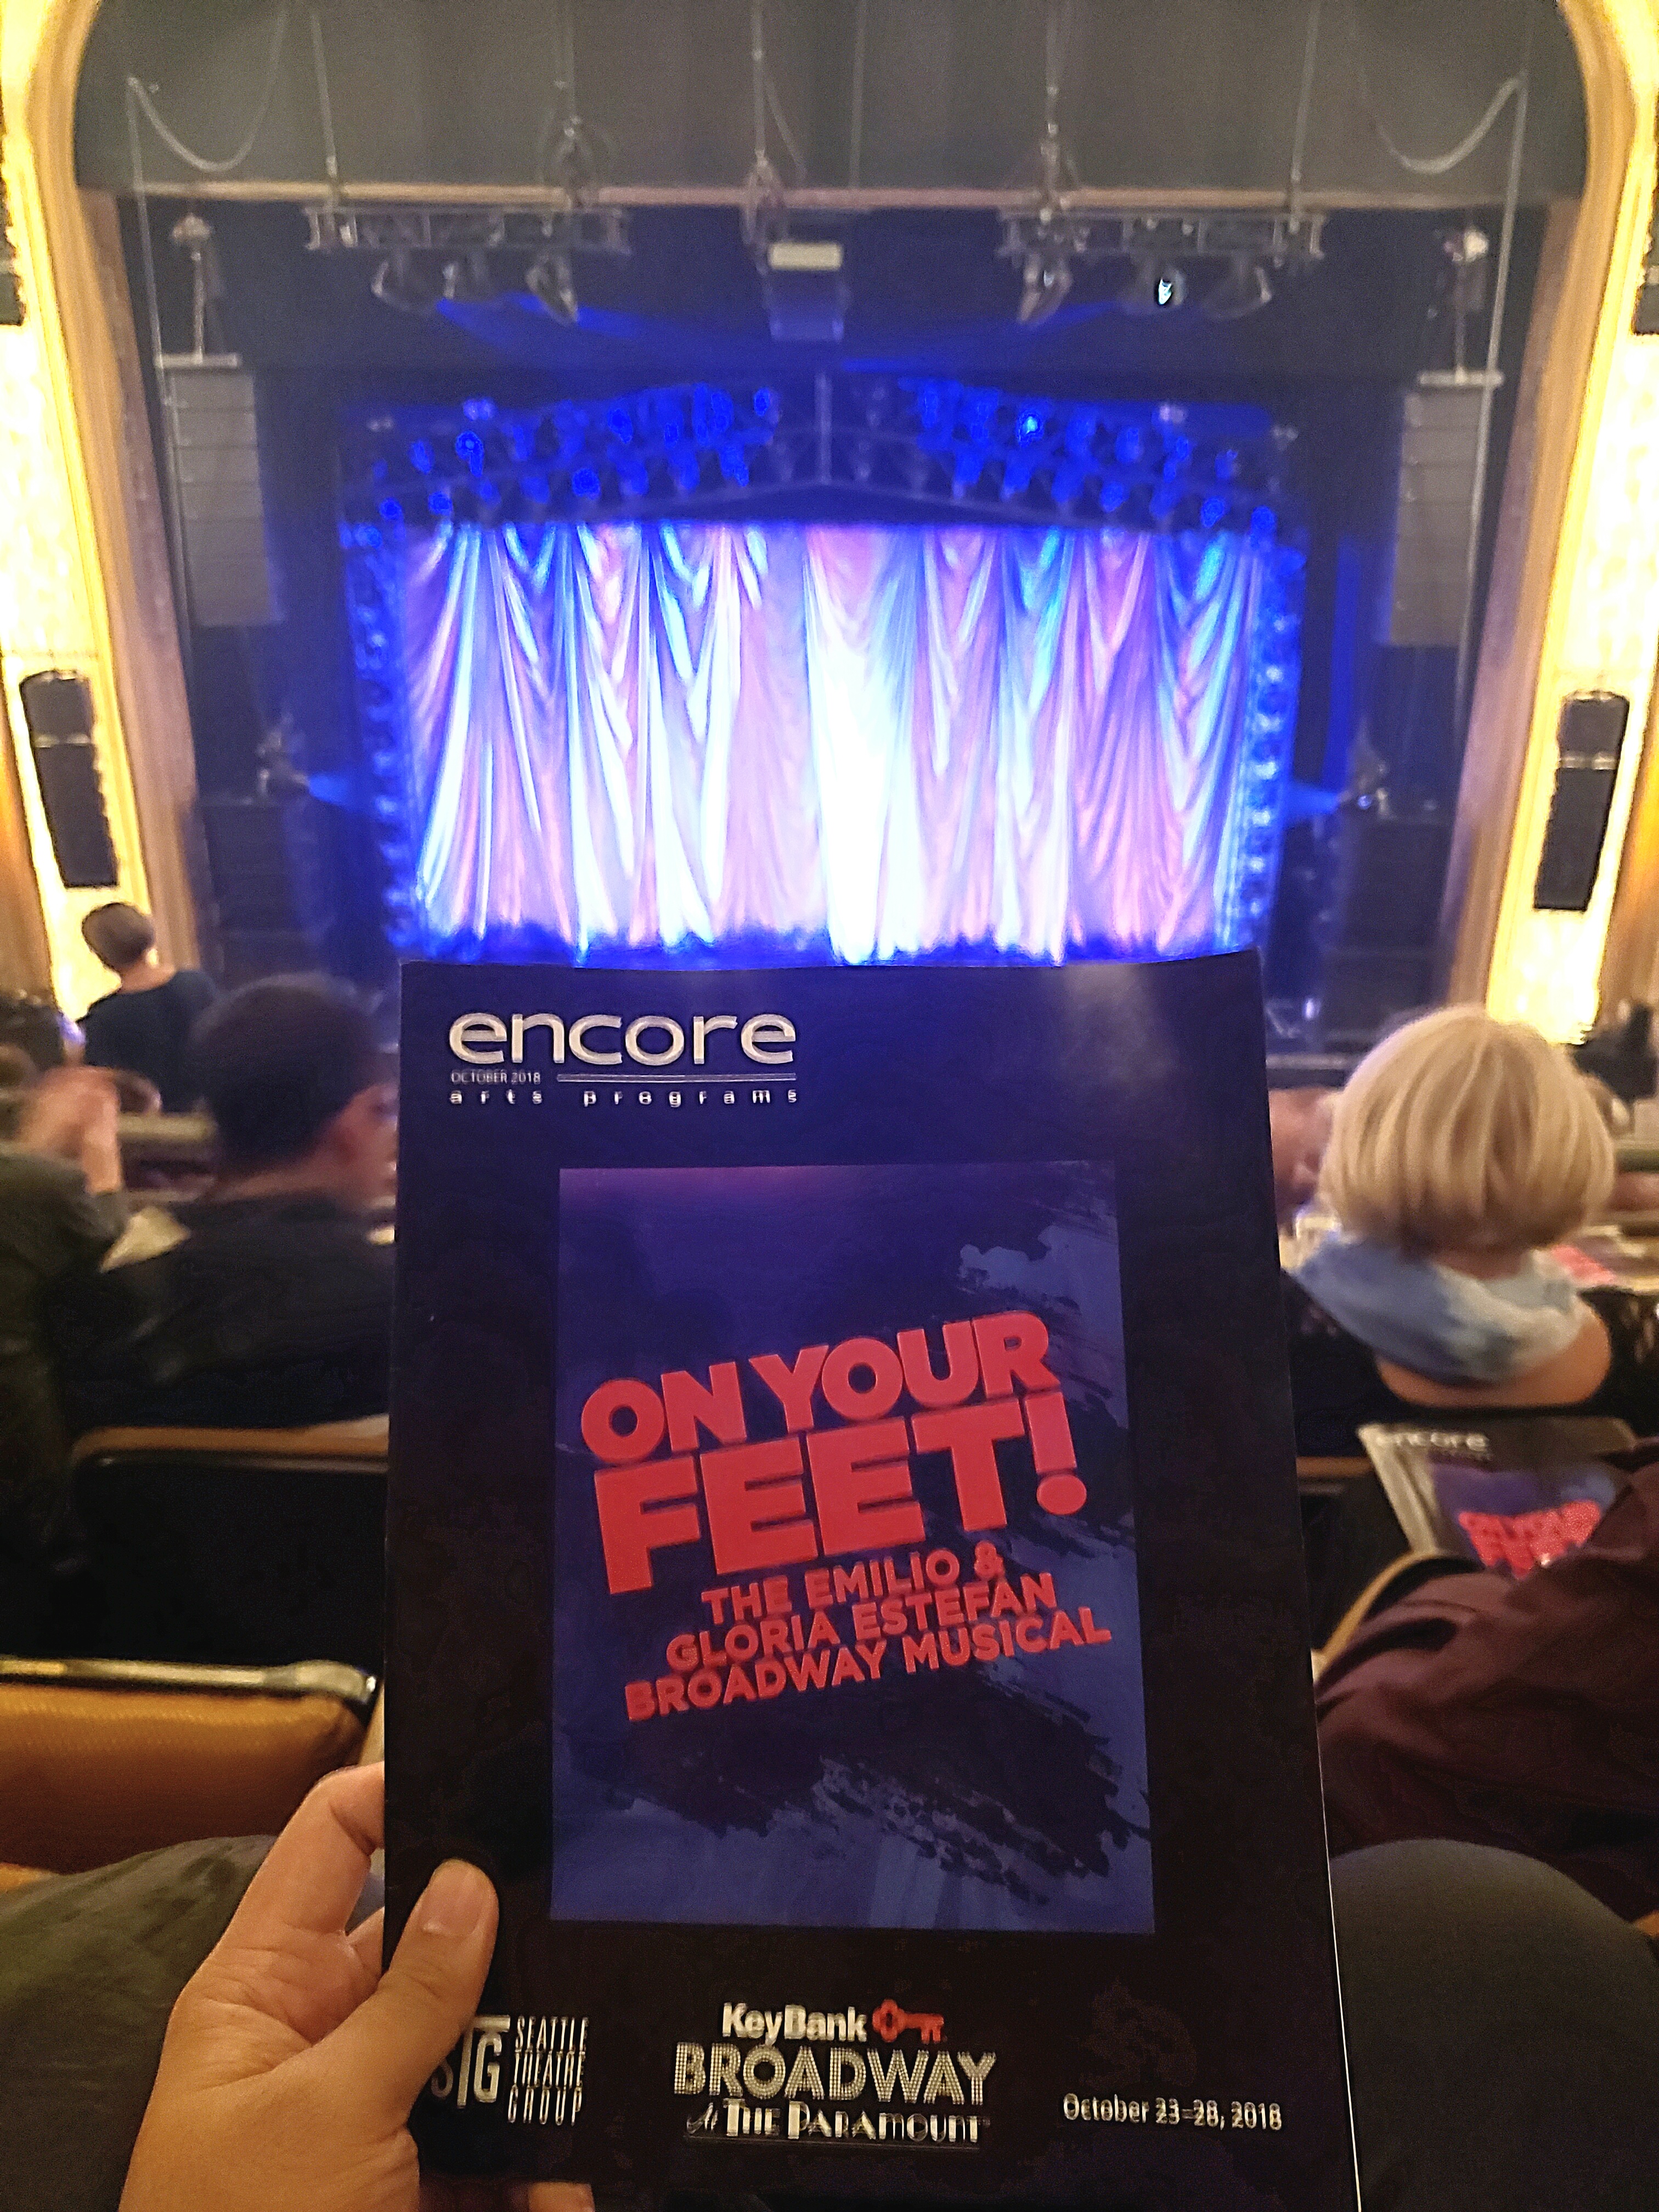 Watched ON YOUR FEET! The Musical. Stellar light show, mesmerizing choreography, golden voices, & hawt Emilio Estefan actor (Ektor Rivera). But like many Paramount Theatre shows, the volume was too loud.